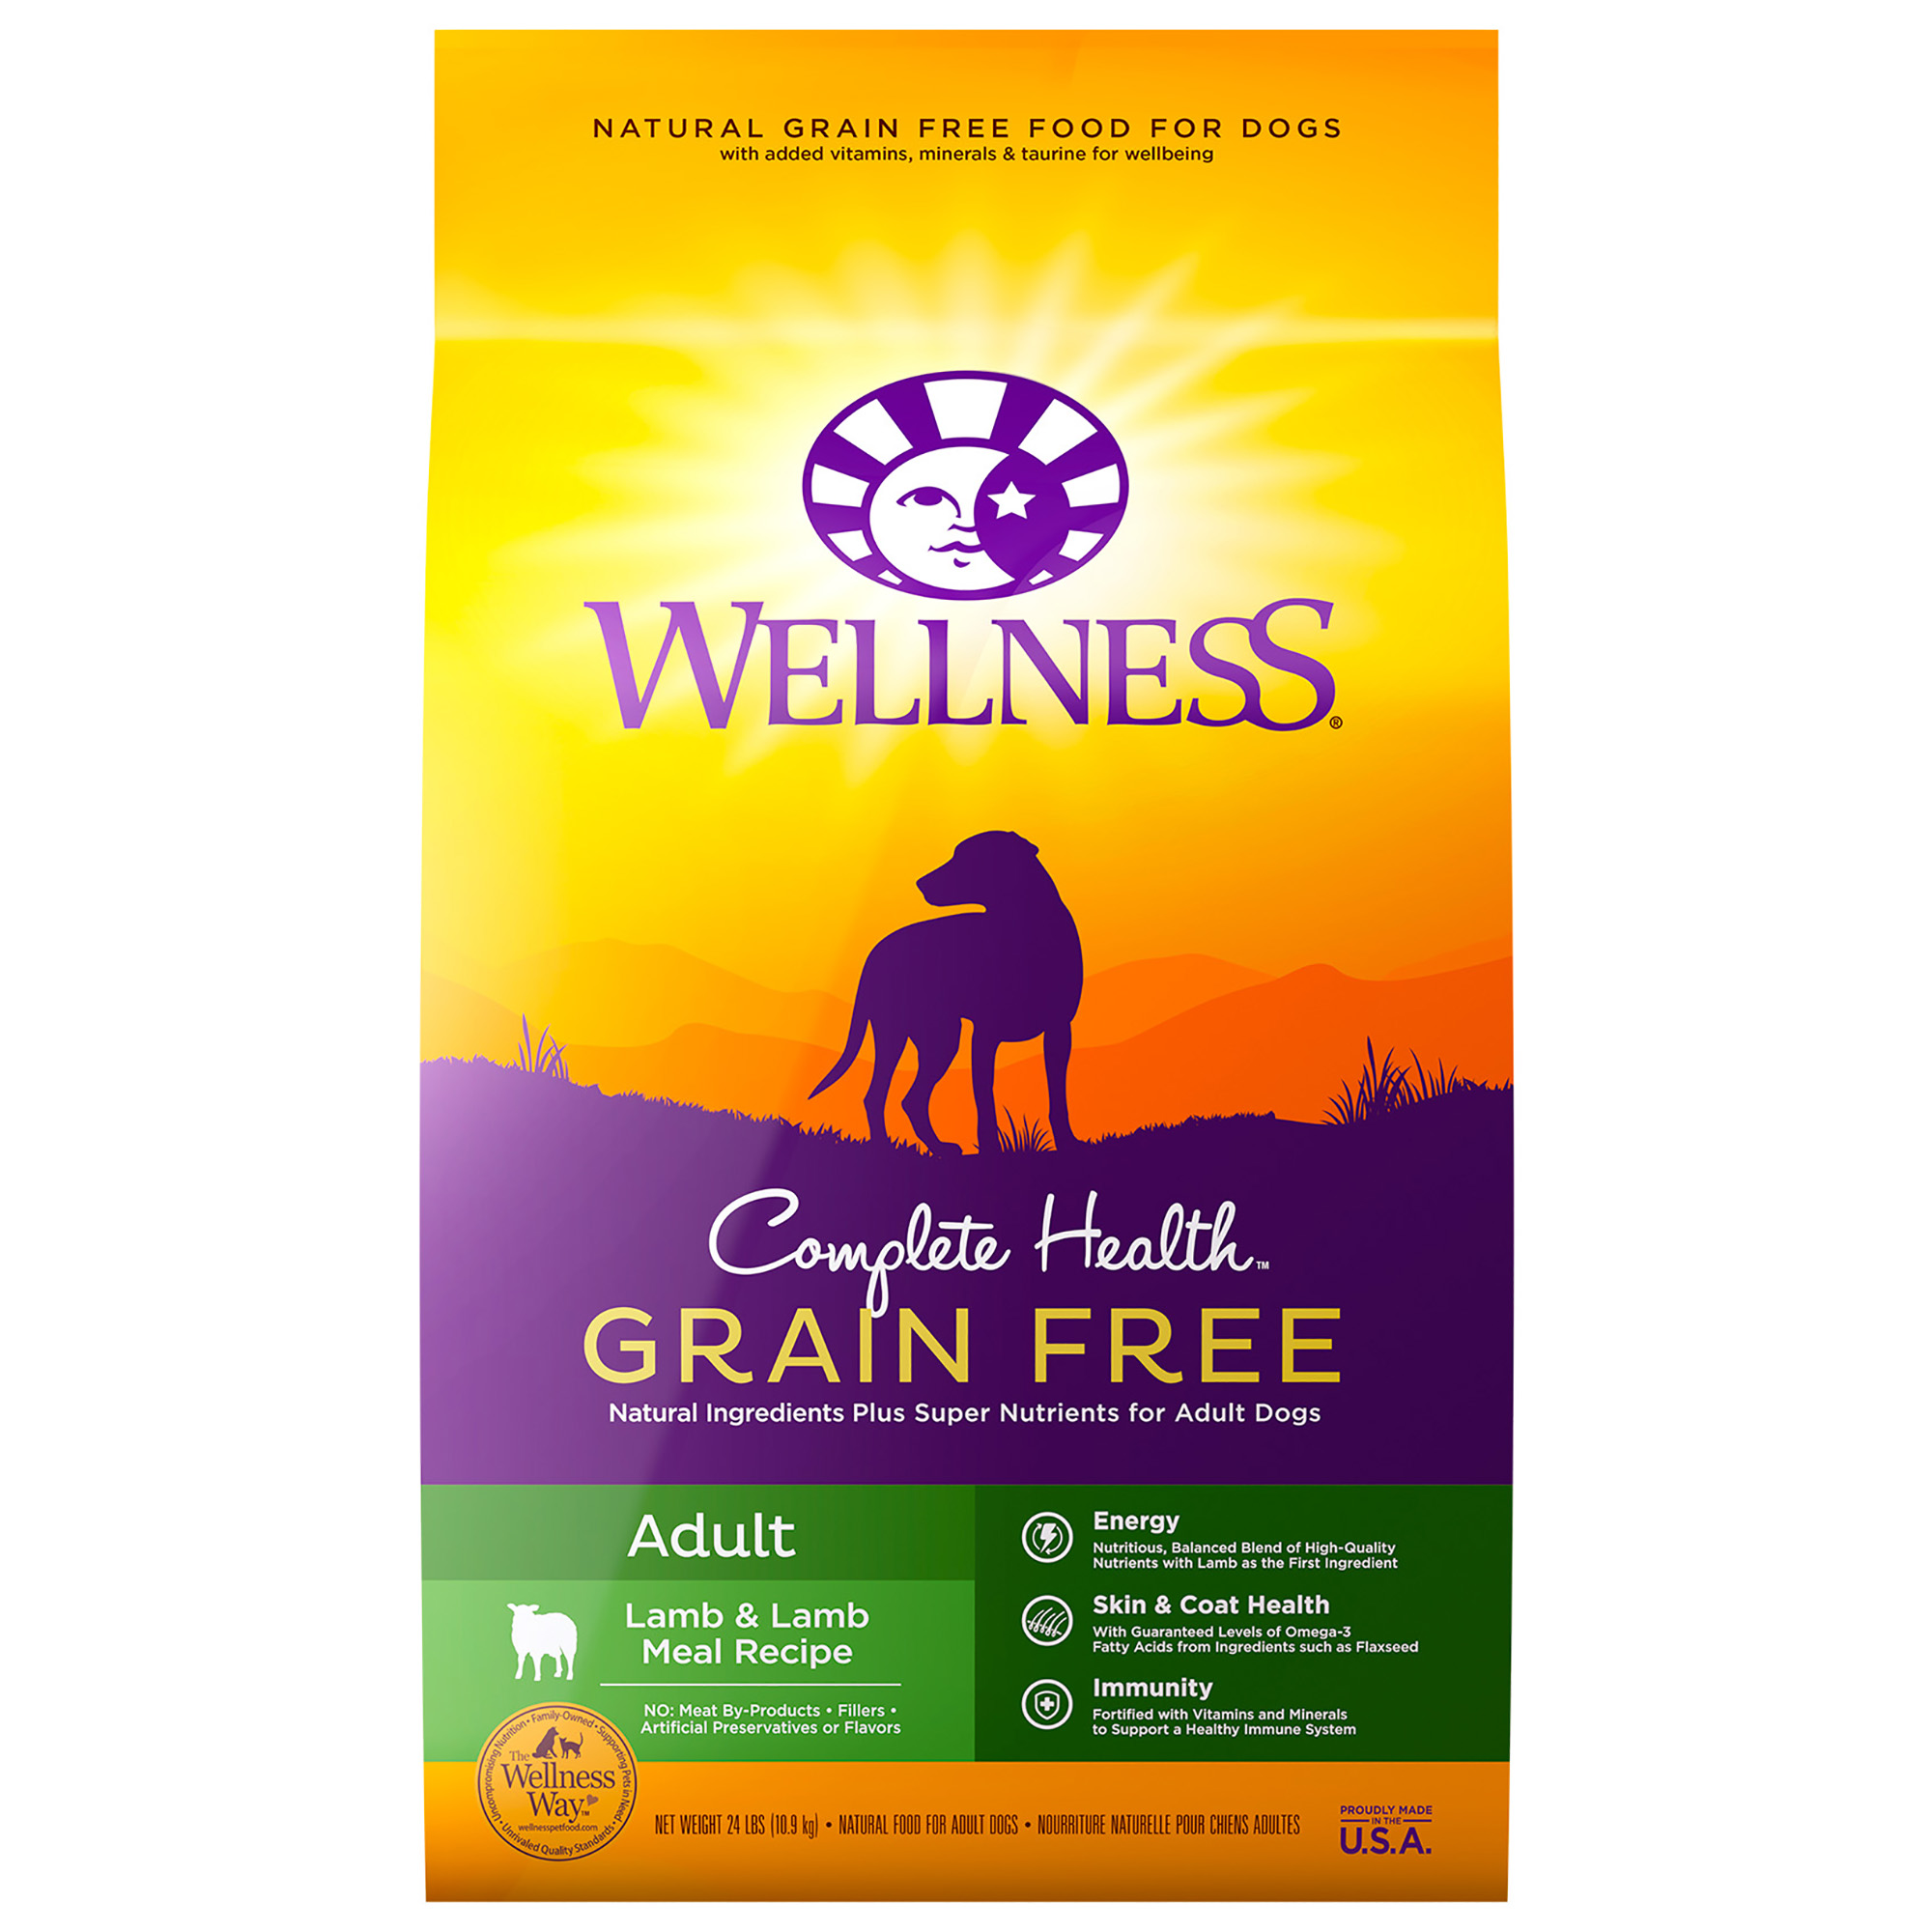 Wellness Complete Health Natural Grain Free Dry Dog Food, Lamb Recipe, 24-Pound Bag - image 1 of 9